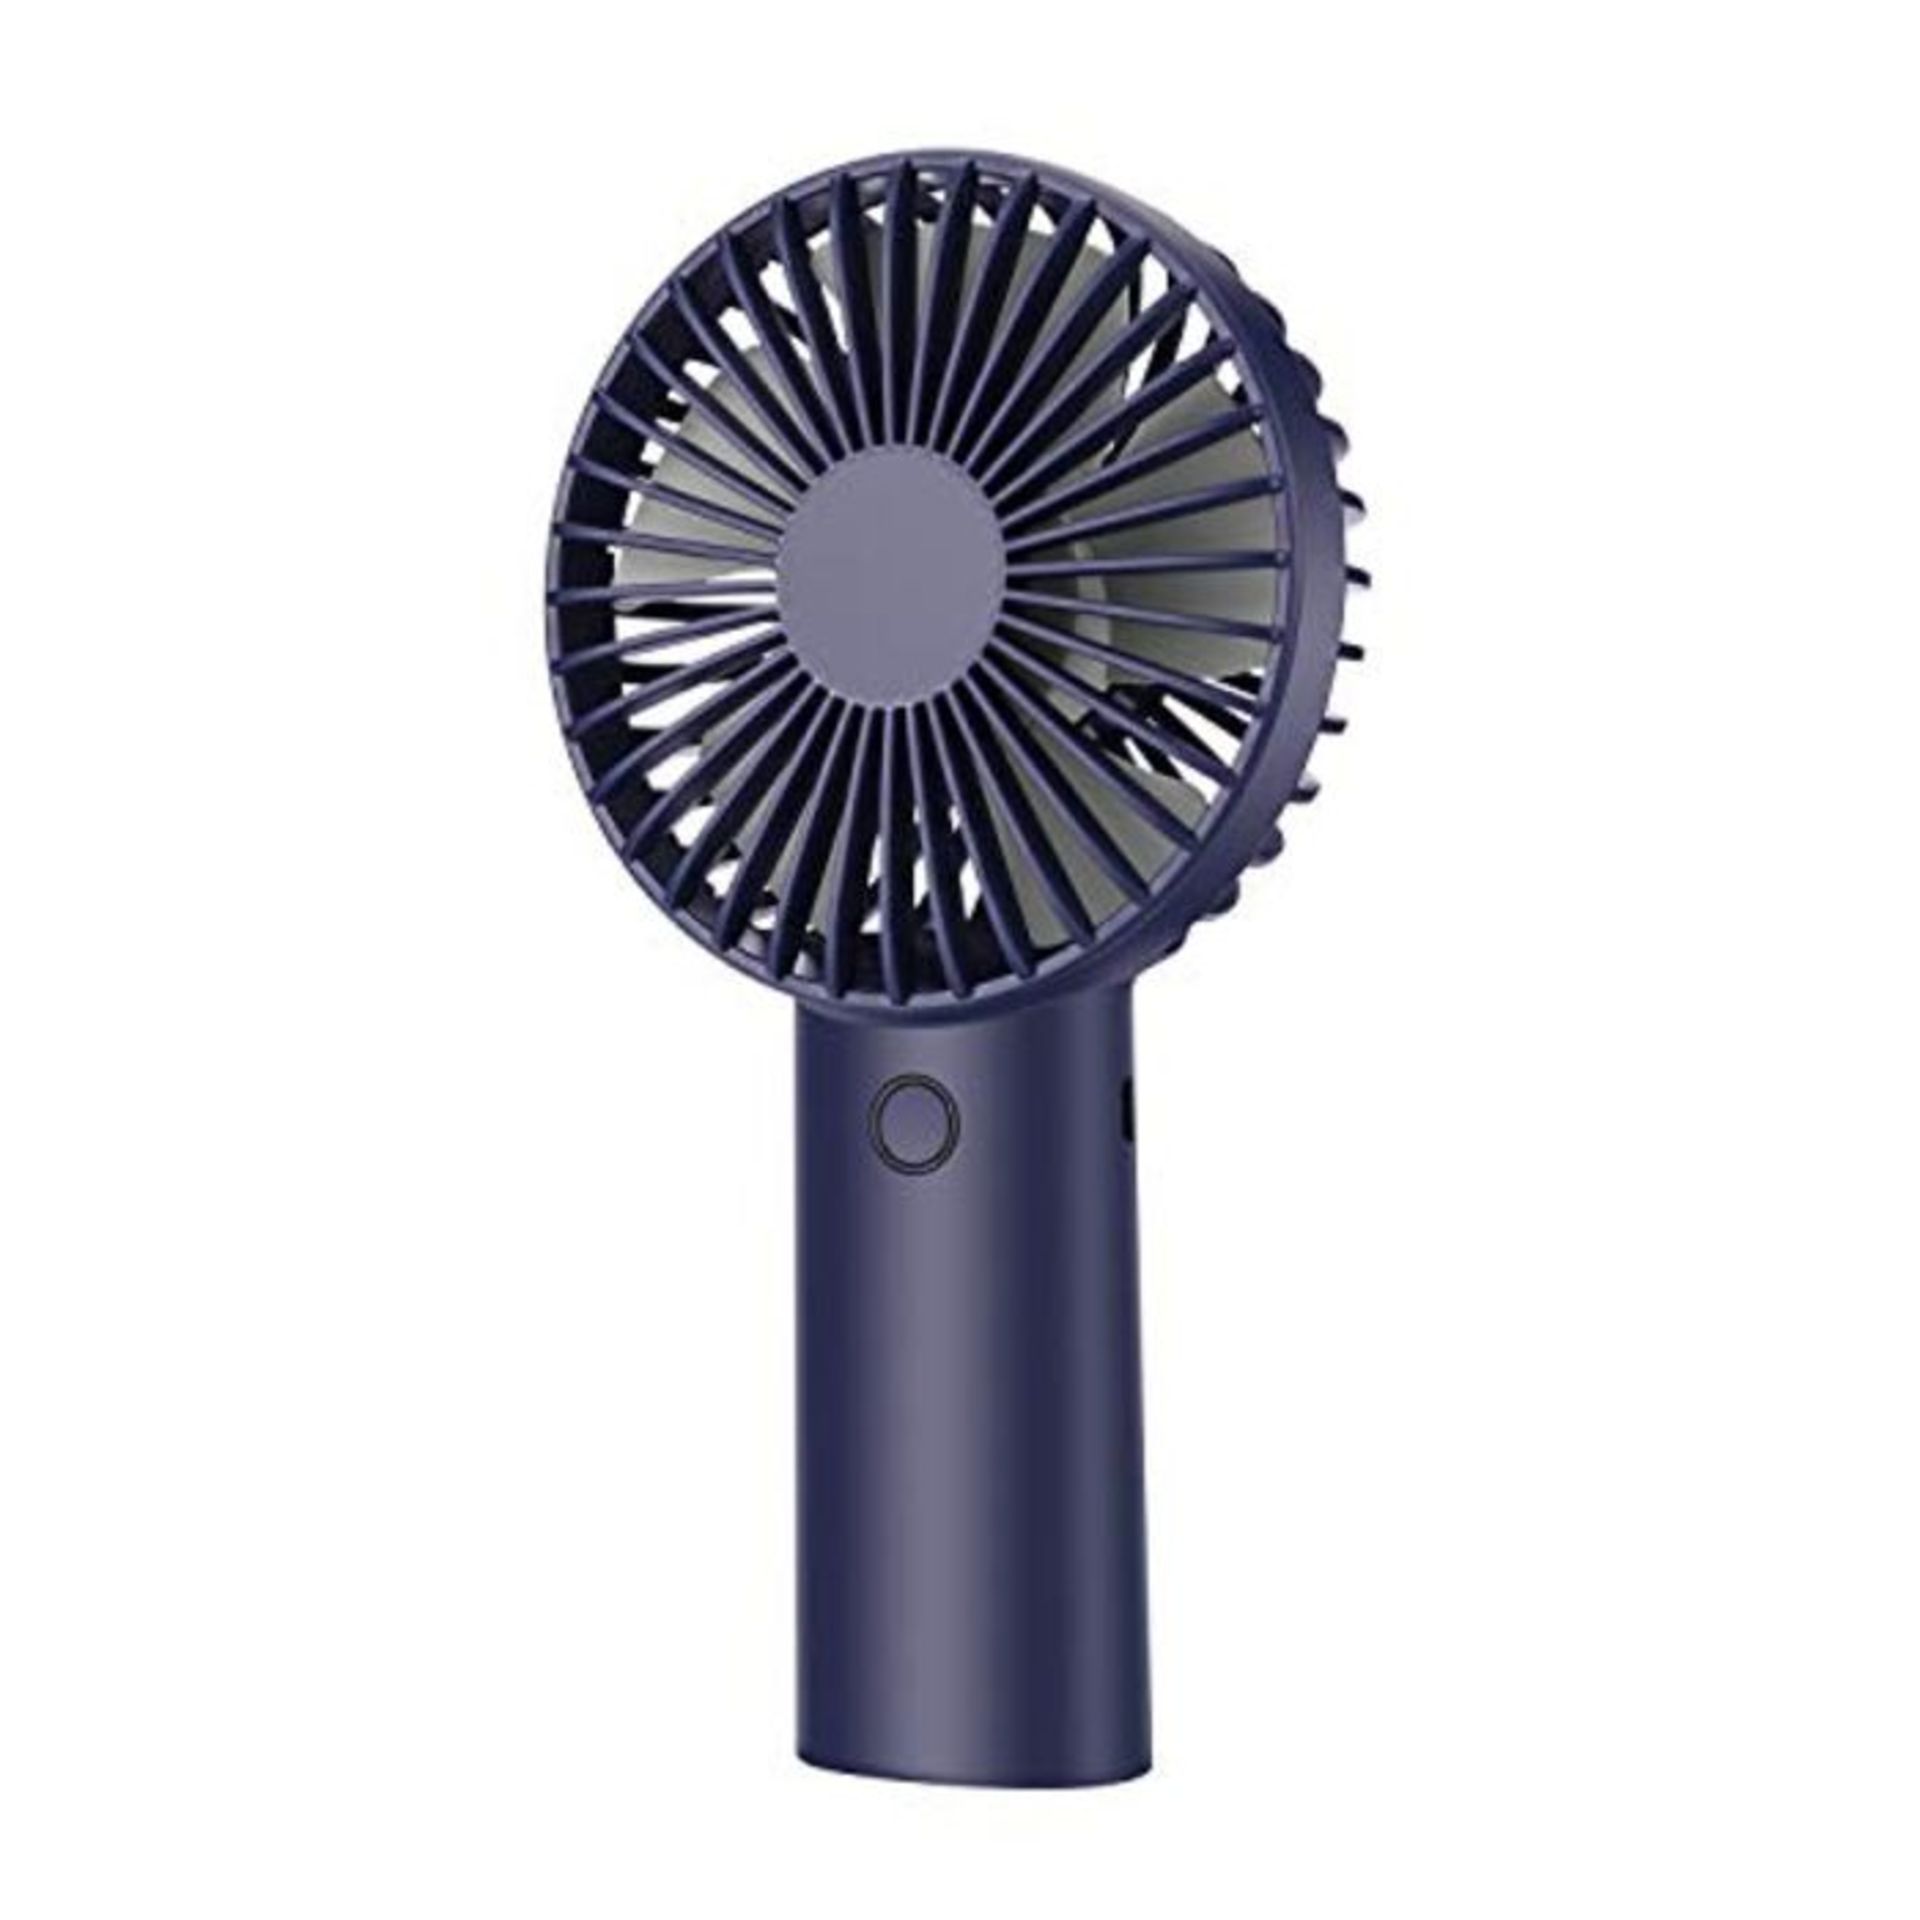 YunTuo Mini Portable Handheld Fan with 4000 mAh Rechargeable Battery, 3 Speeds Persona